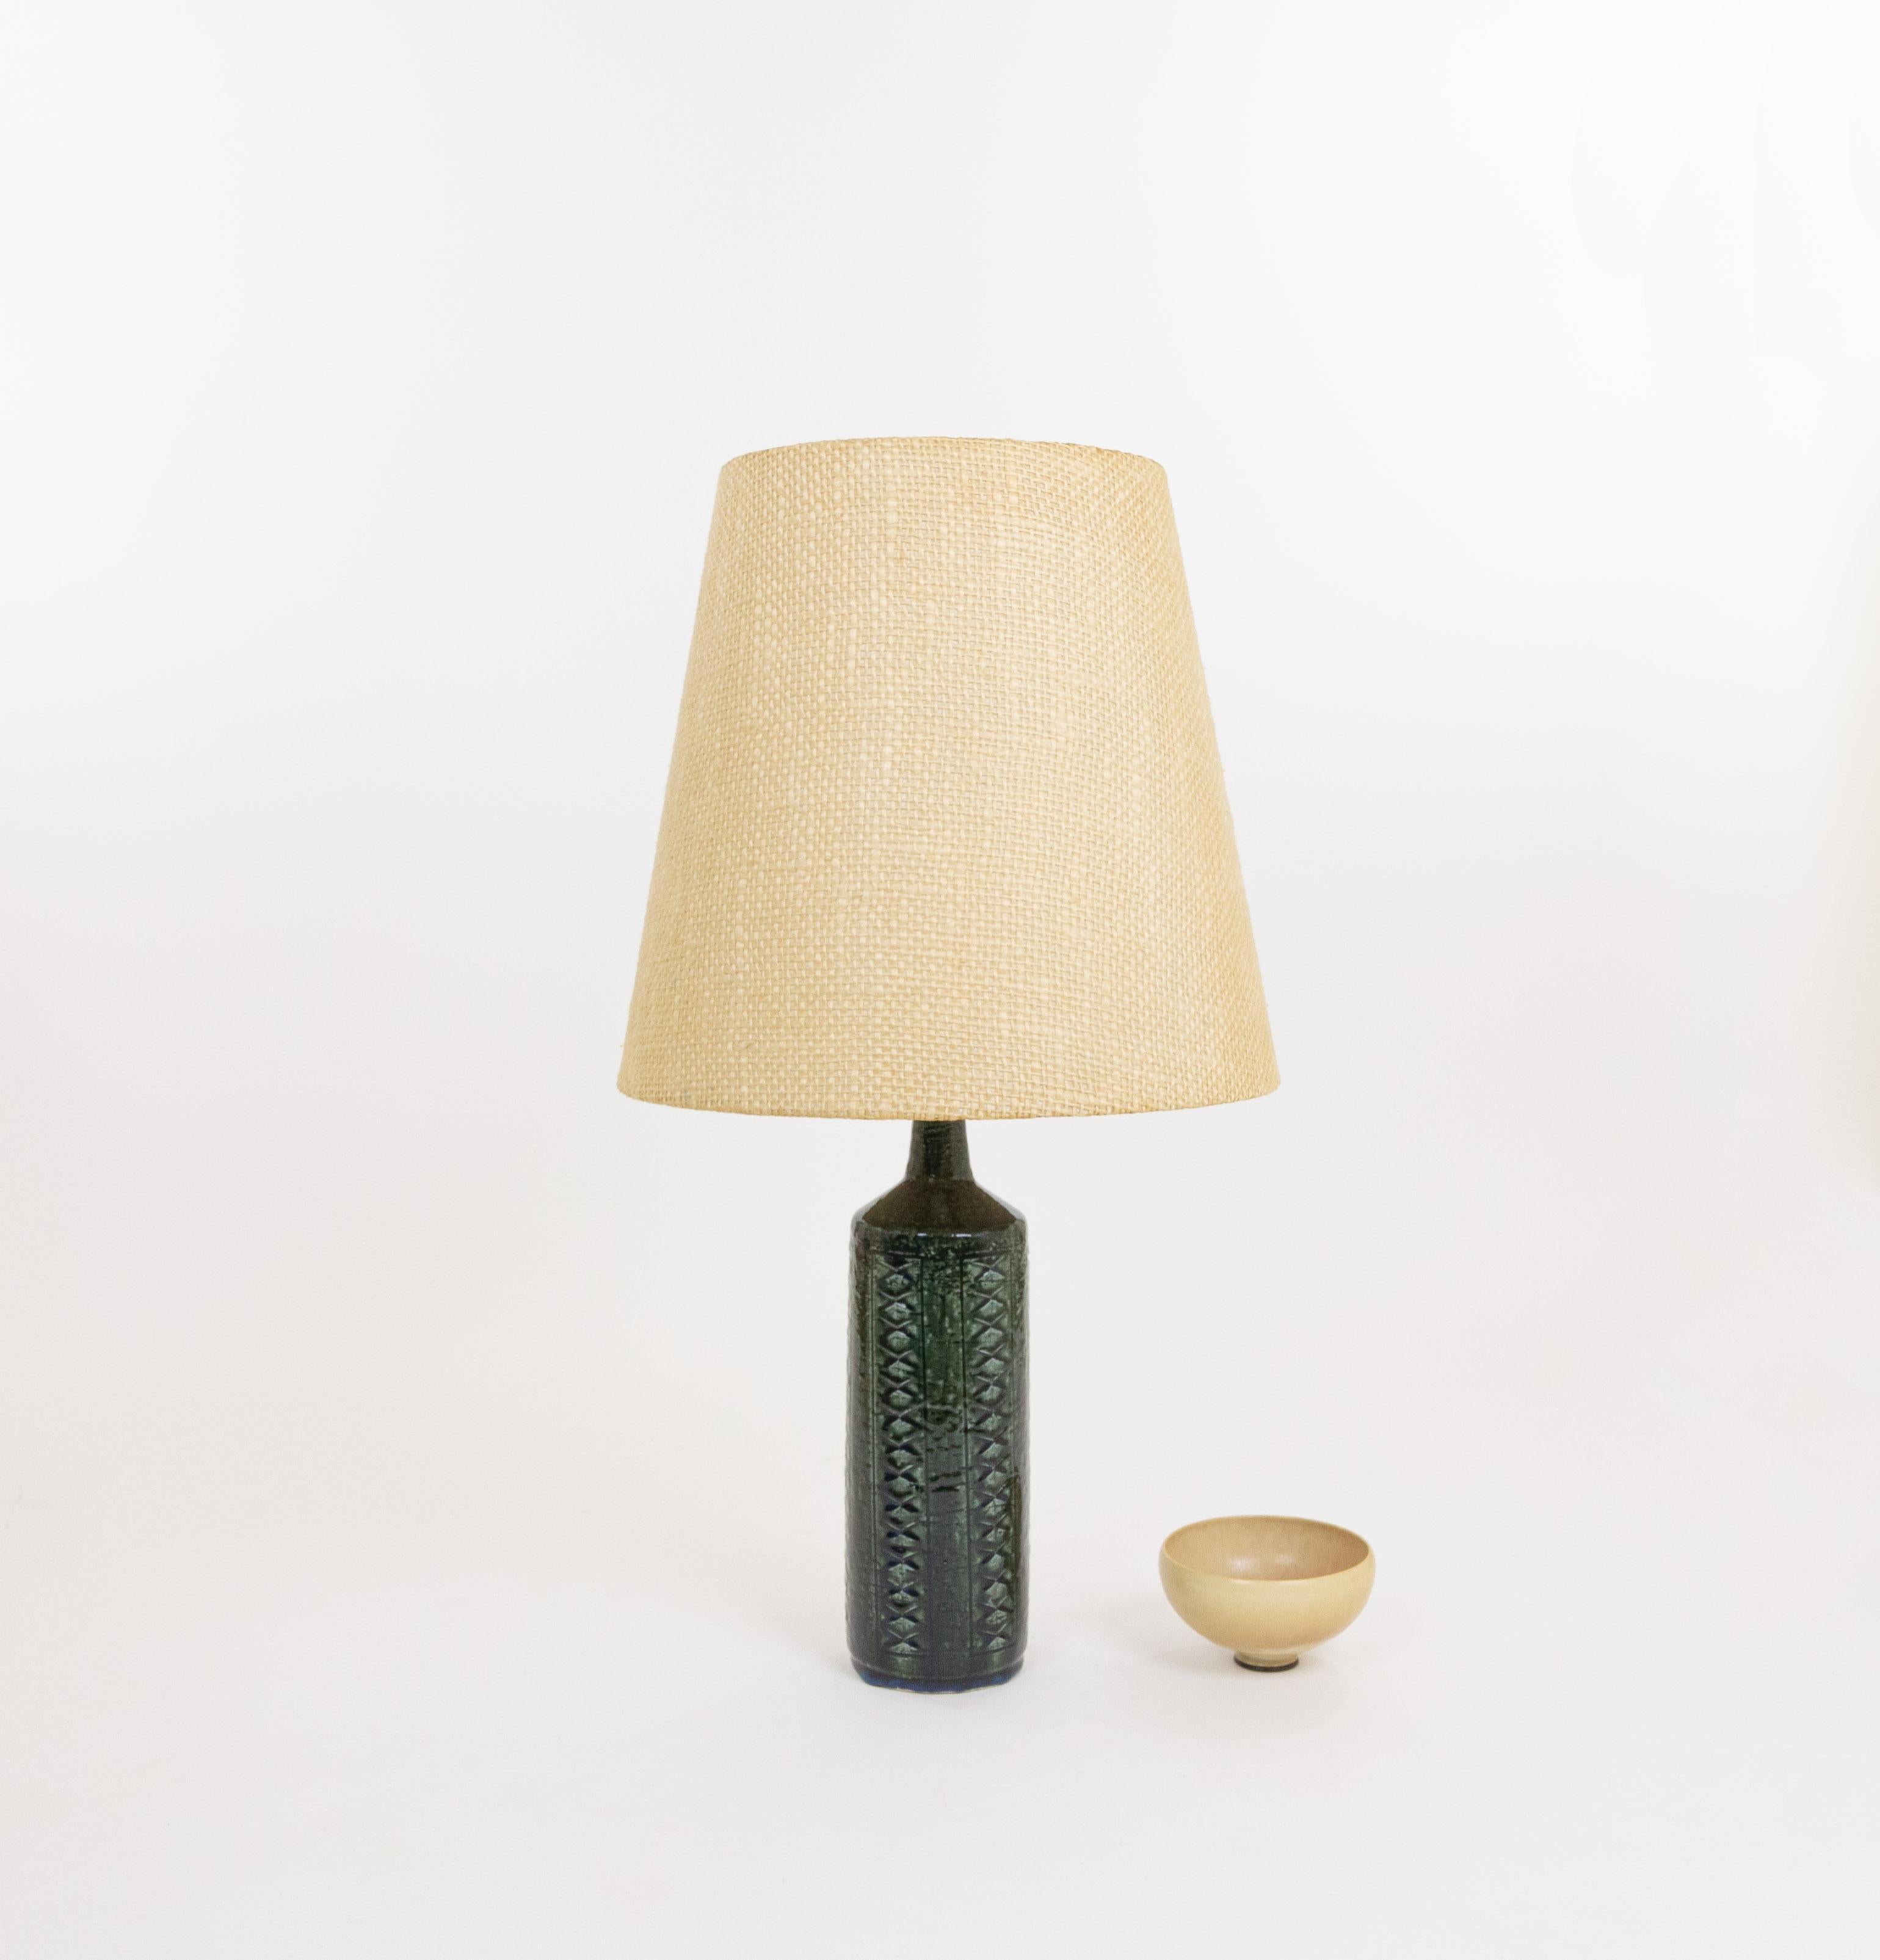 Green Blue DL/27 table lamp by Linnemann-Schmidt for Palshus, 1960s In Good Condition For Sale In Rotterdam, NL